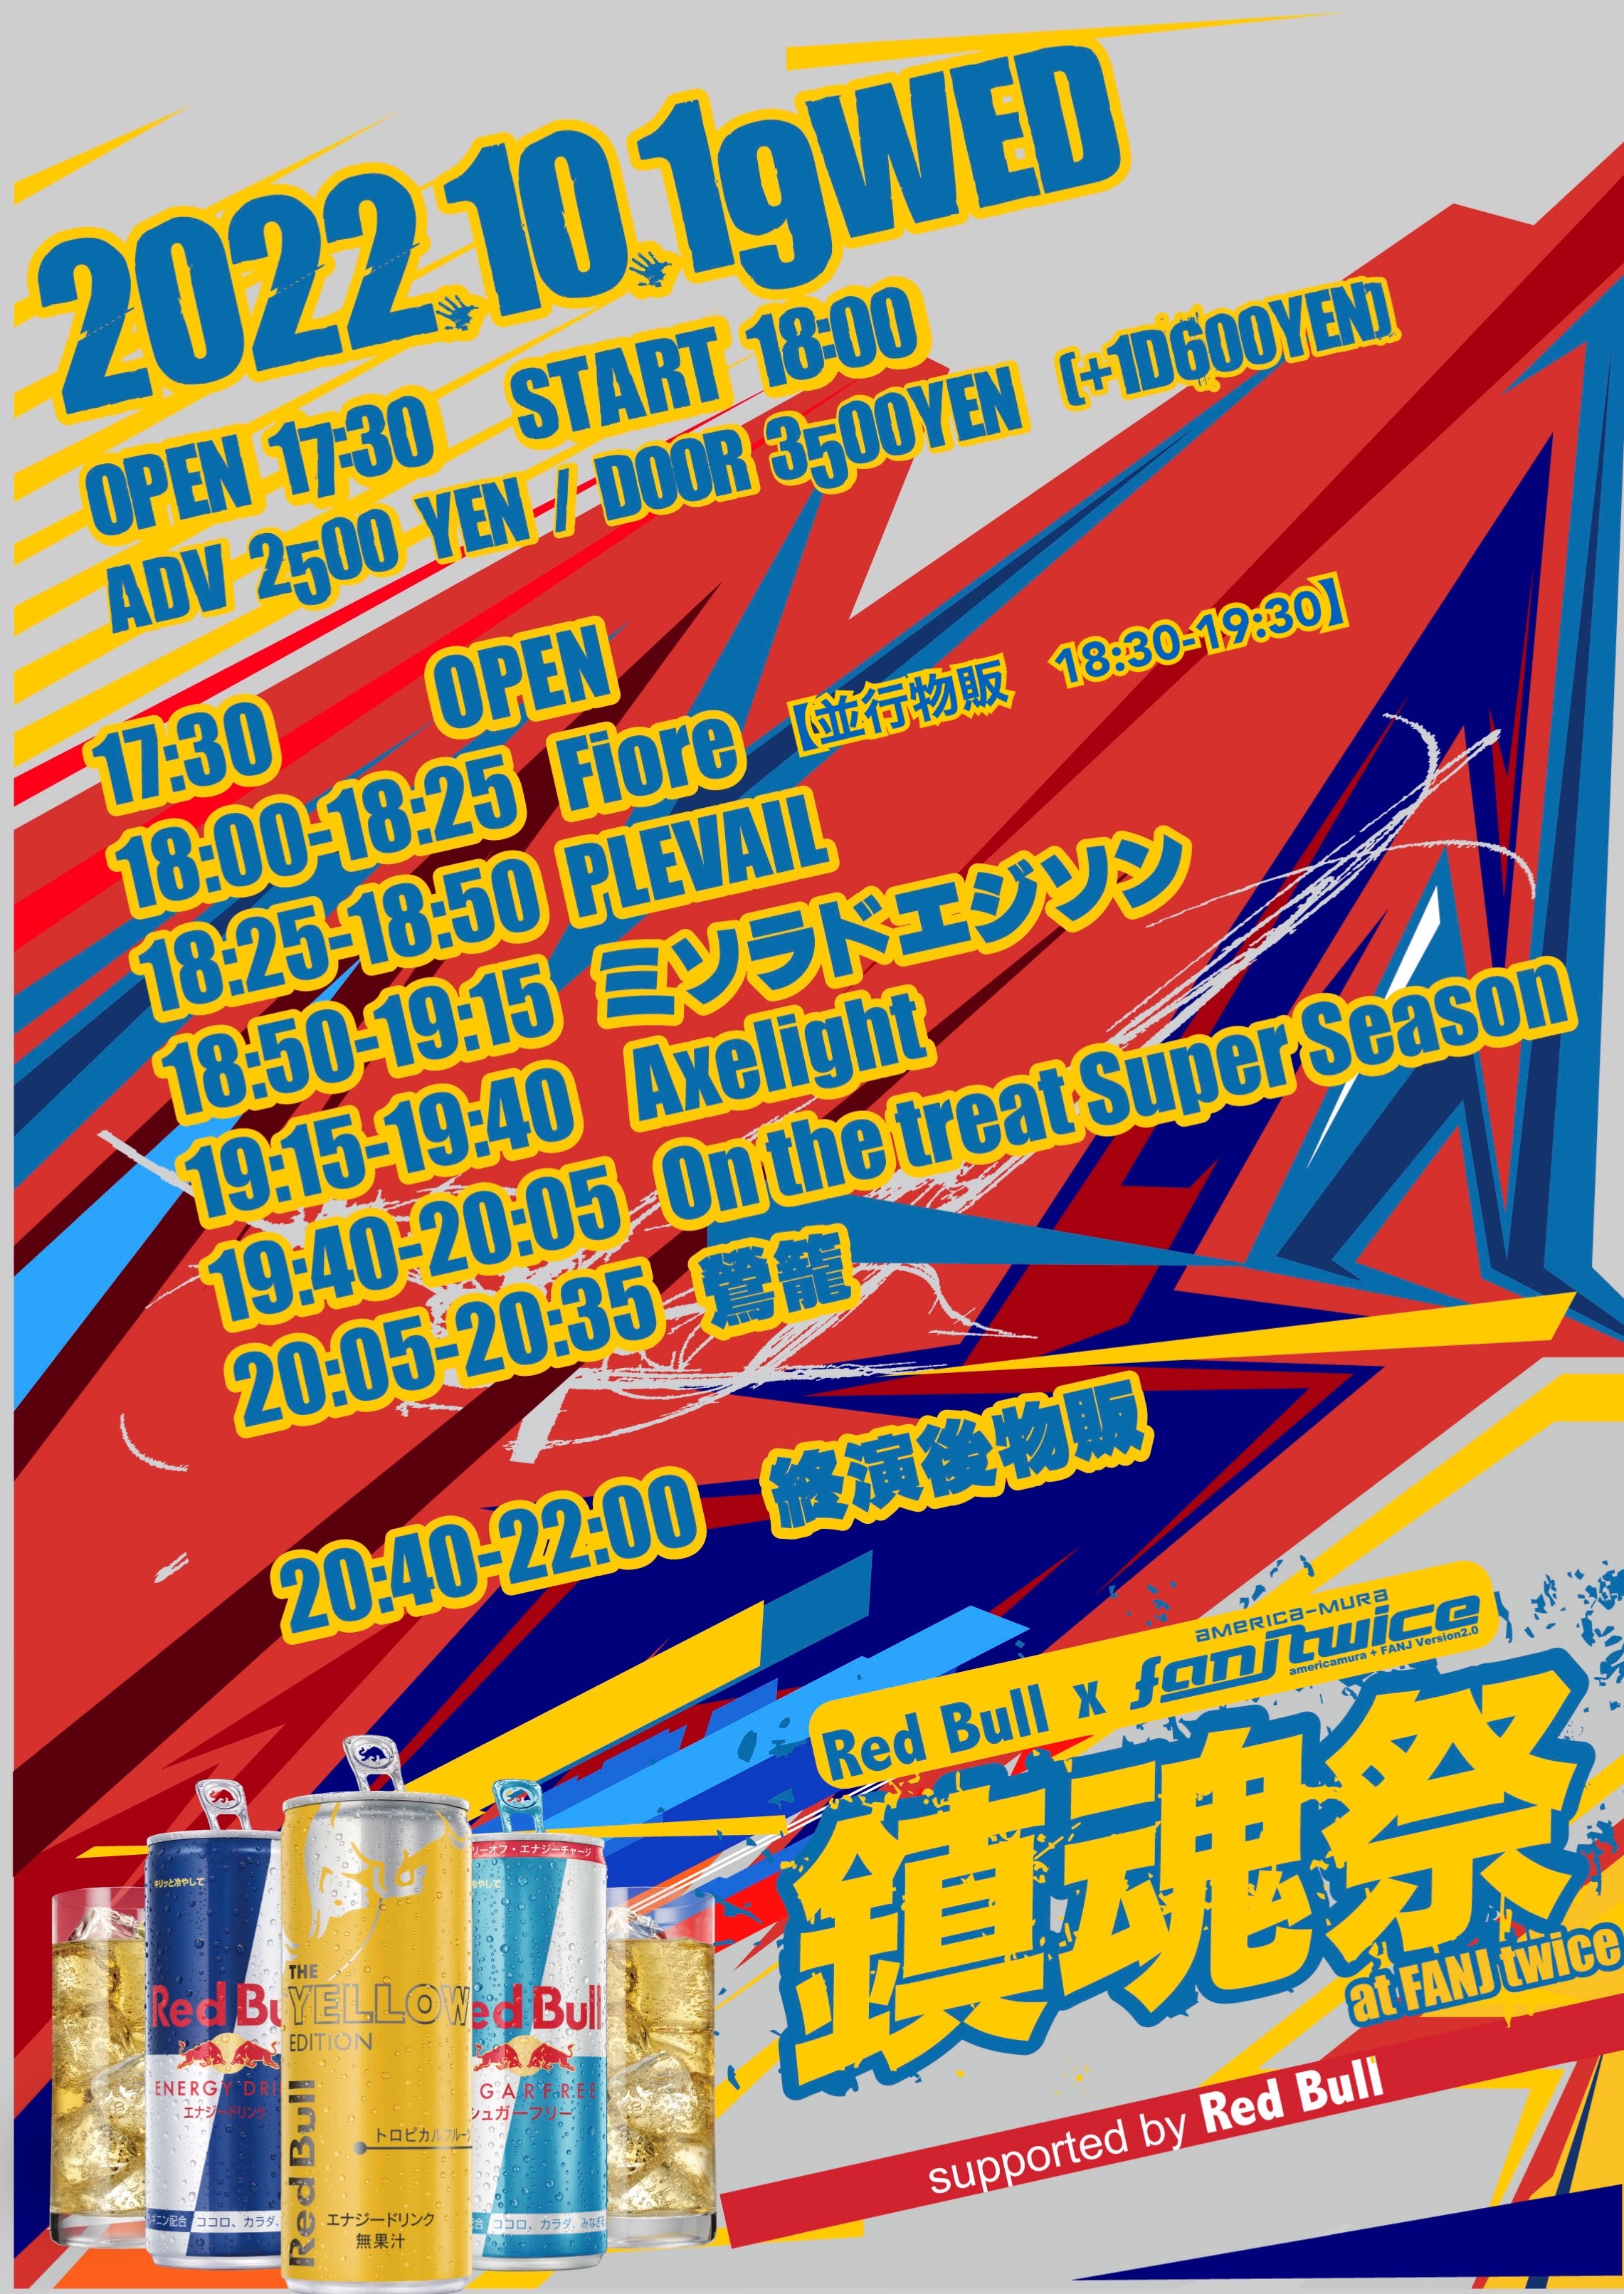 Red Bull×FANJtwice 『鎮魂祭』supported by Red Bull 〜IDOL EDITION